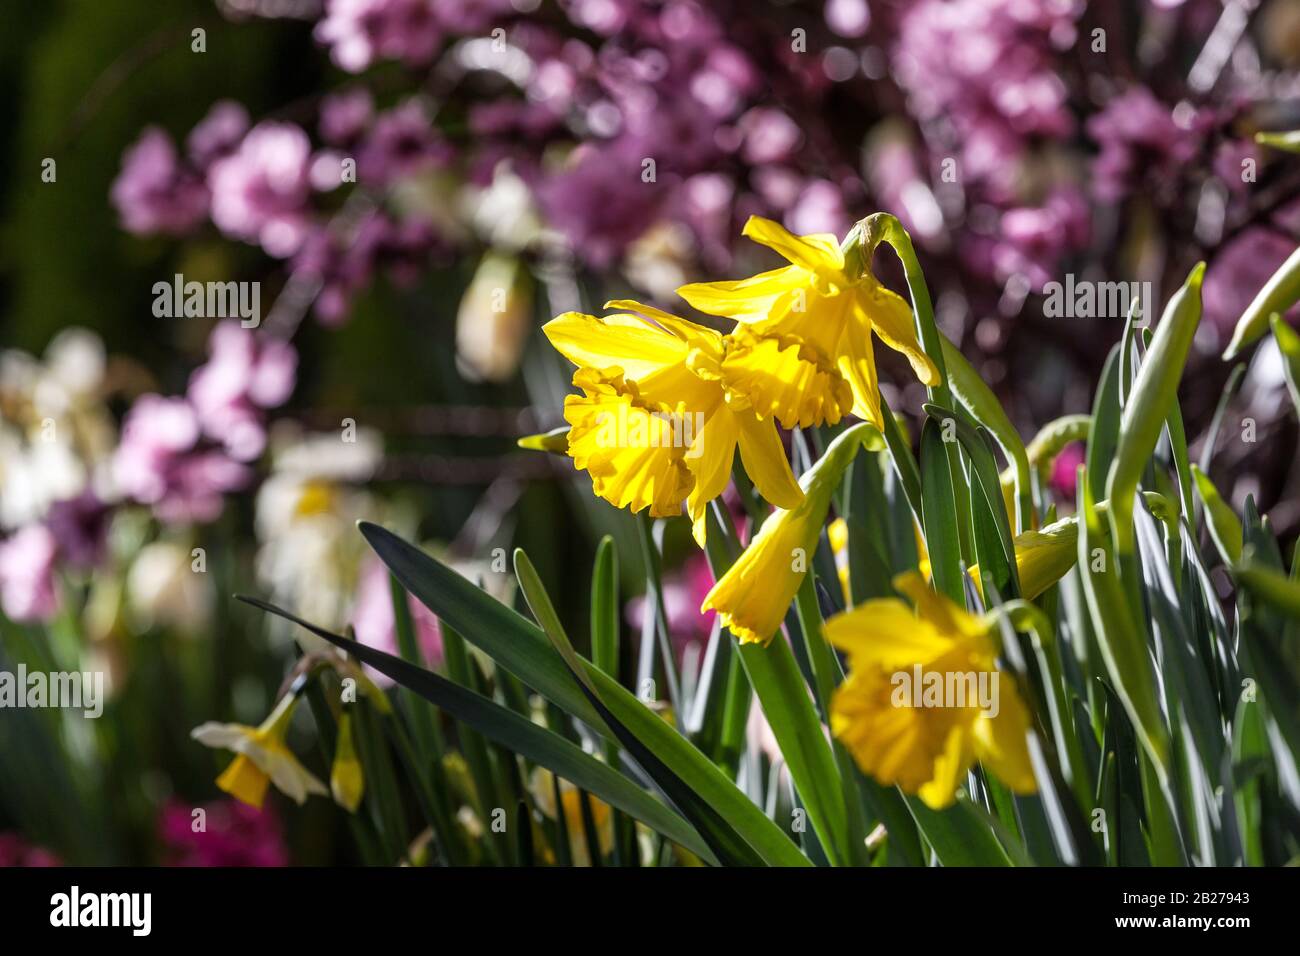 Narcissus Daffodil Golden Harvest Daffodils march flowers Stock Photo